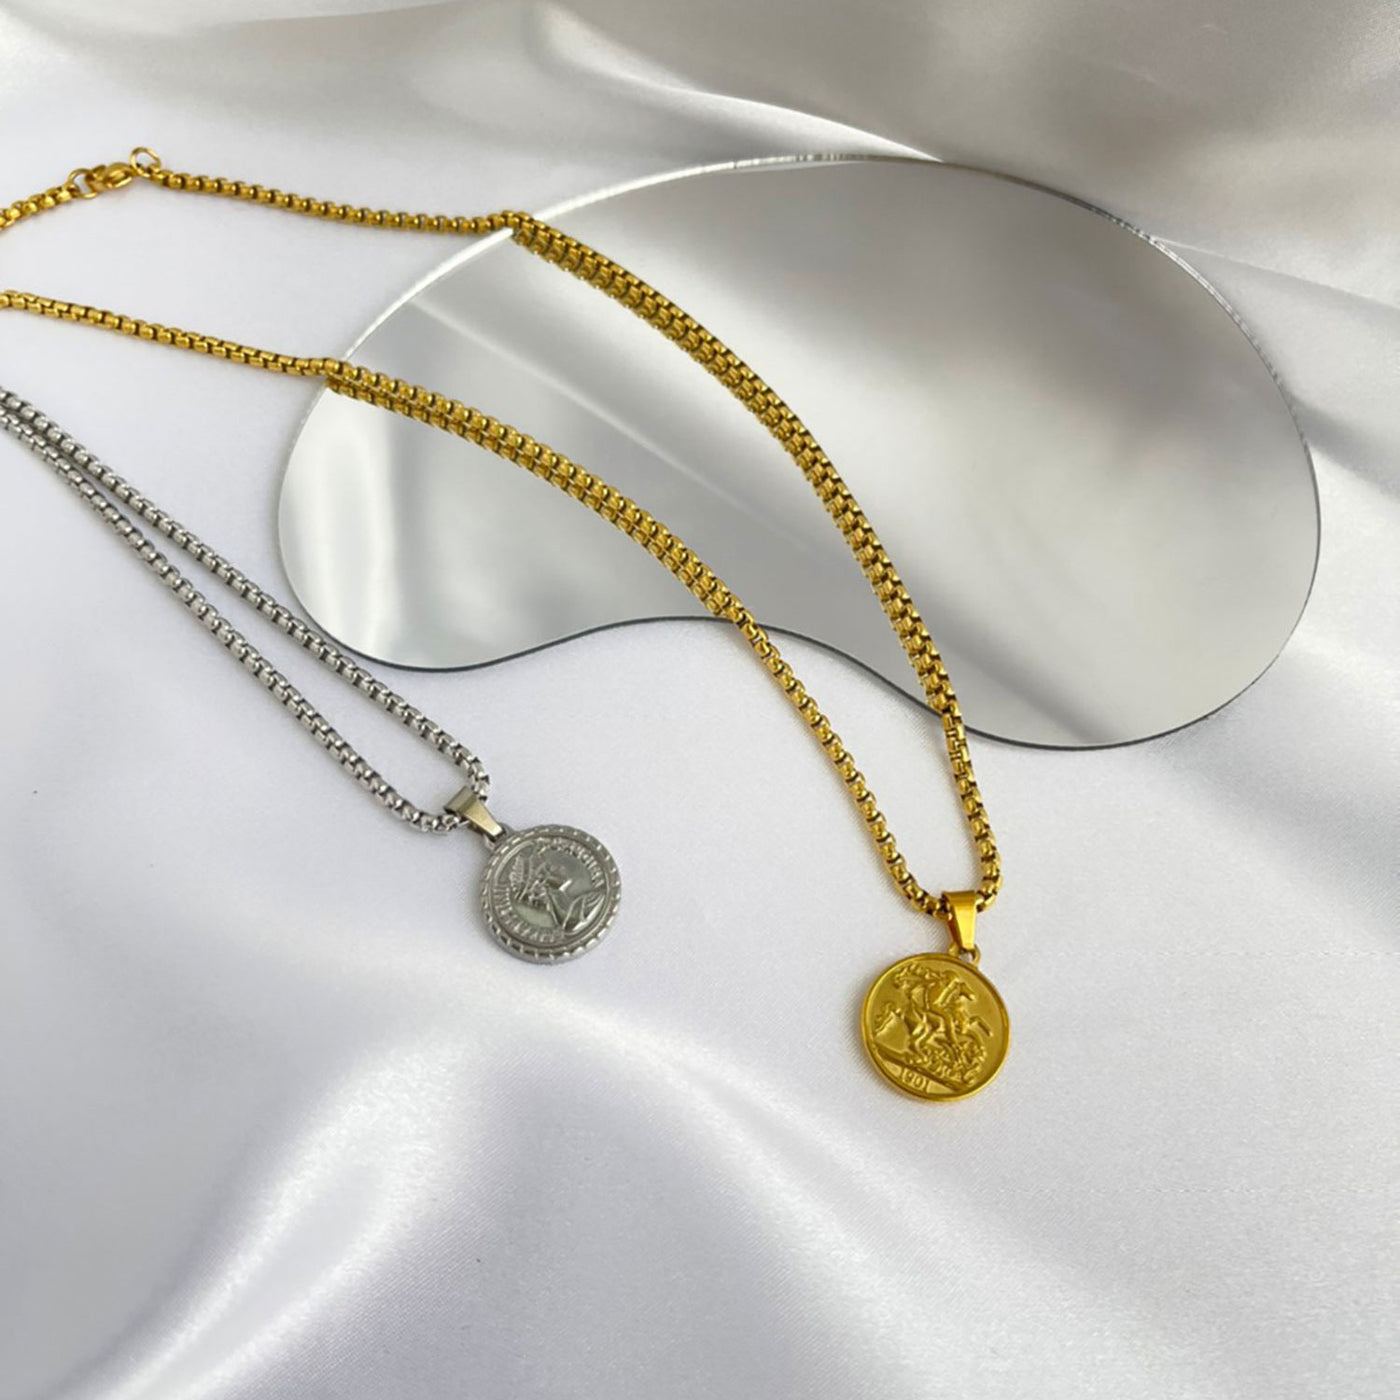 18k coin necklace.